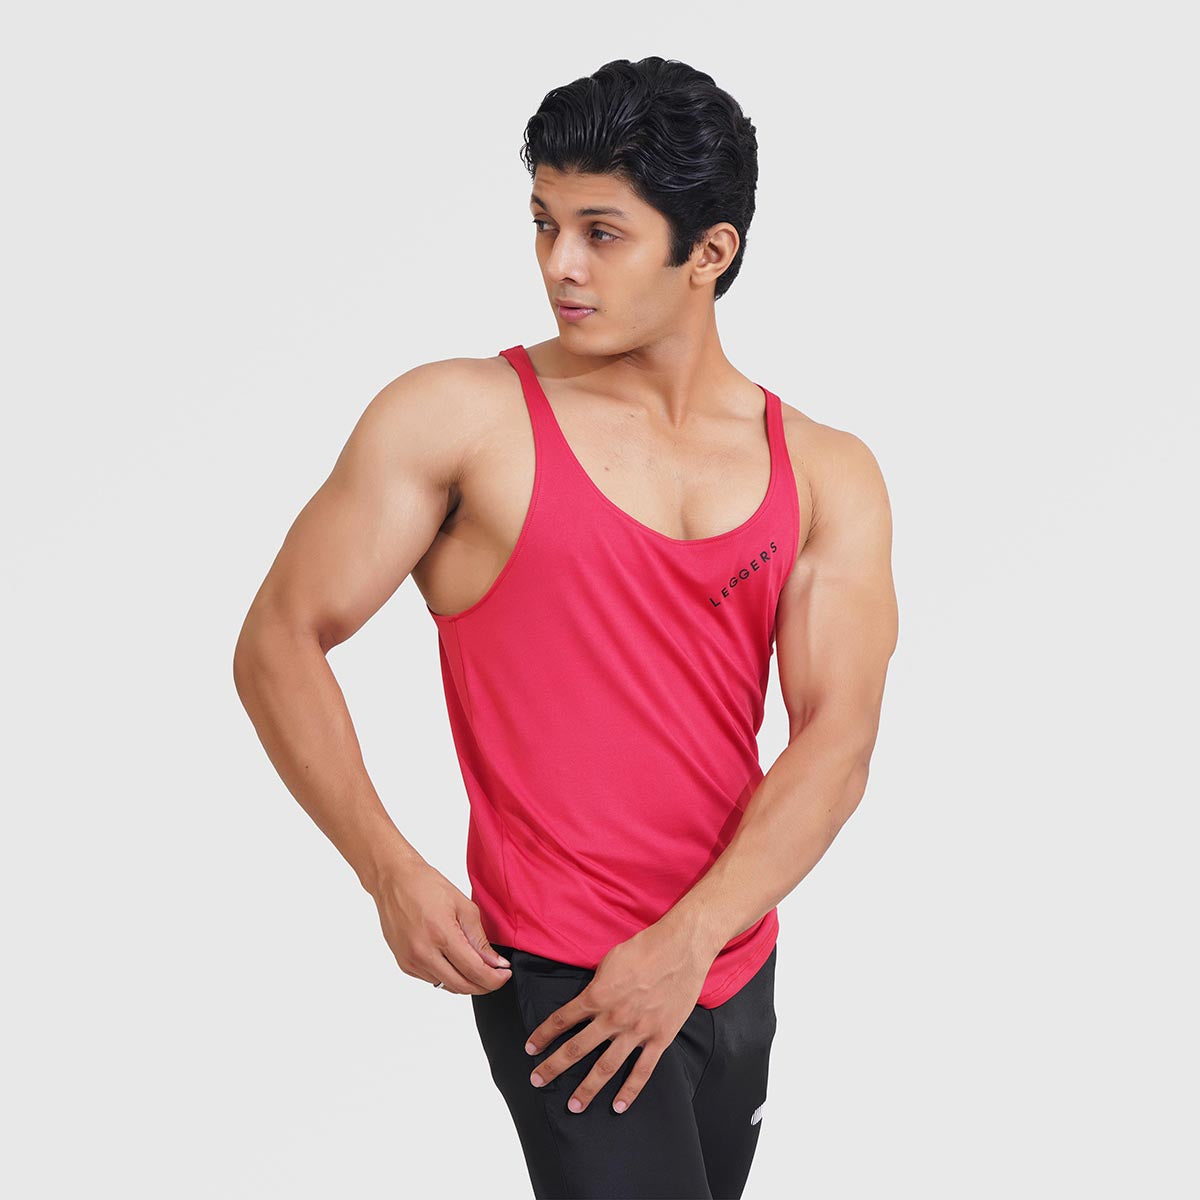 FusionFlex RED TOP TANK